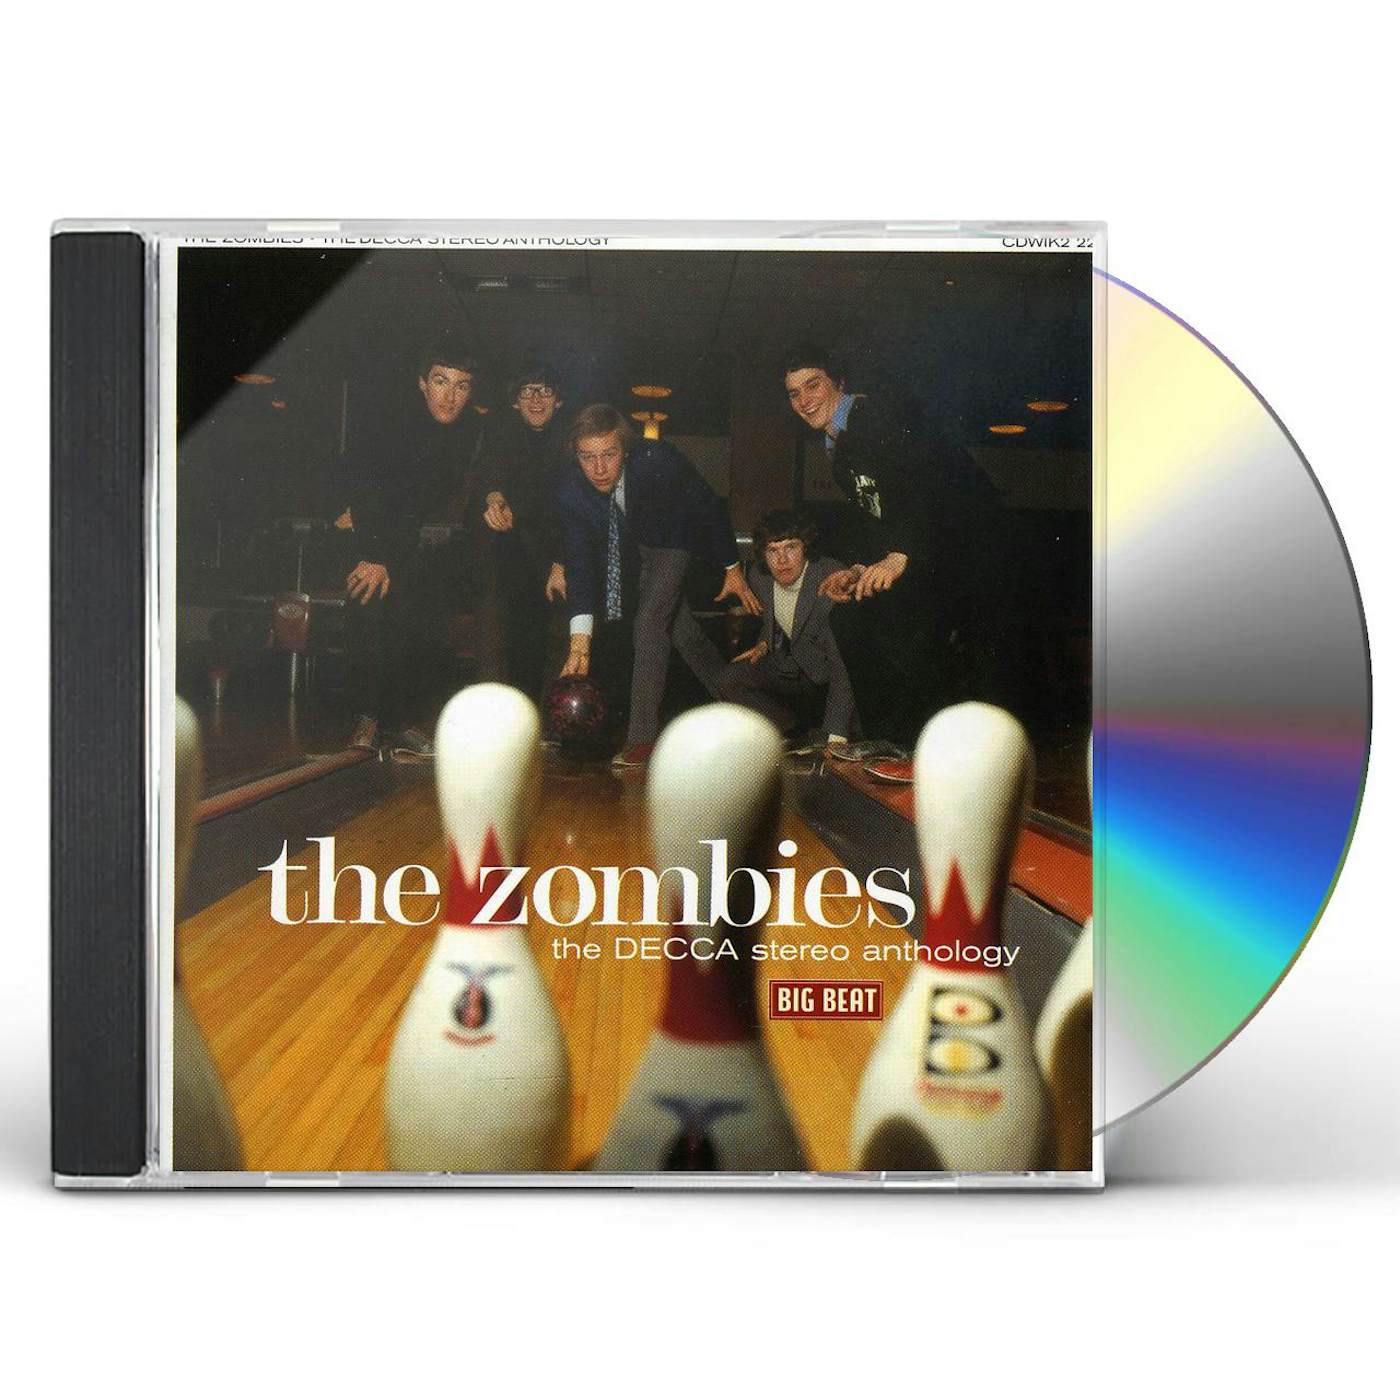 The Zombies DECCA STEREO ANTHOLOGY CD